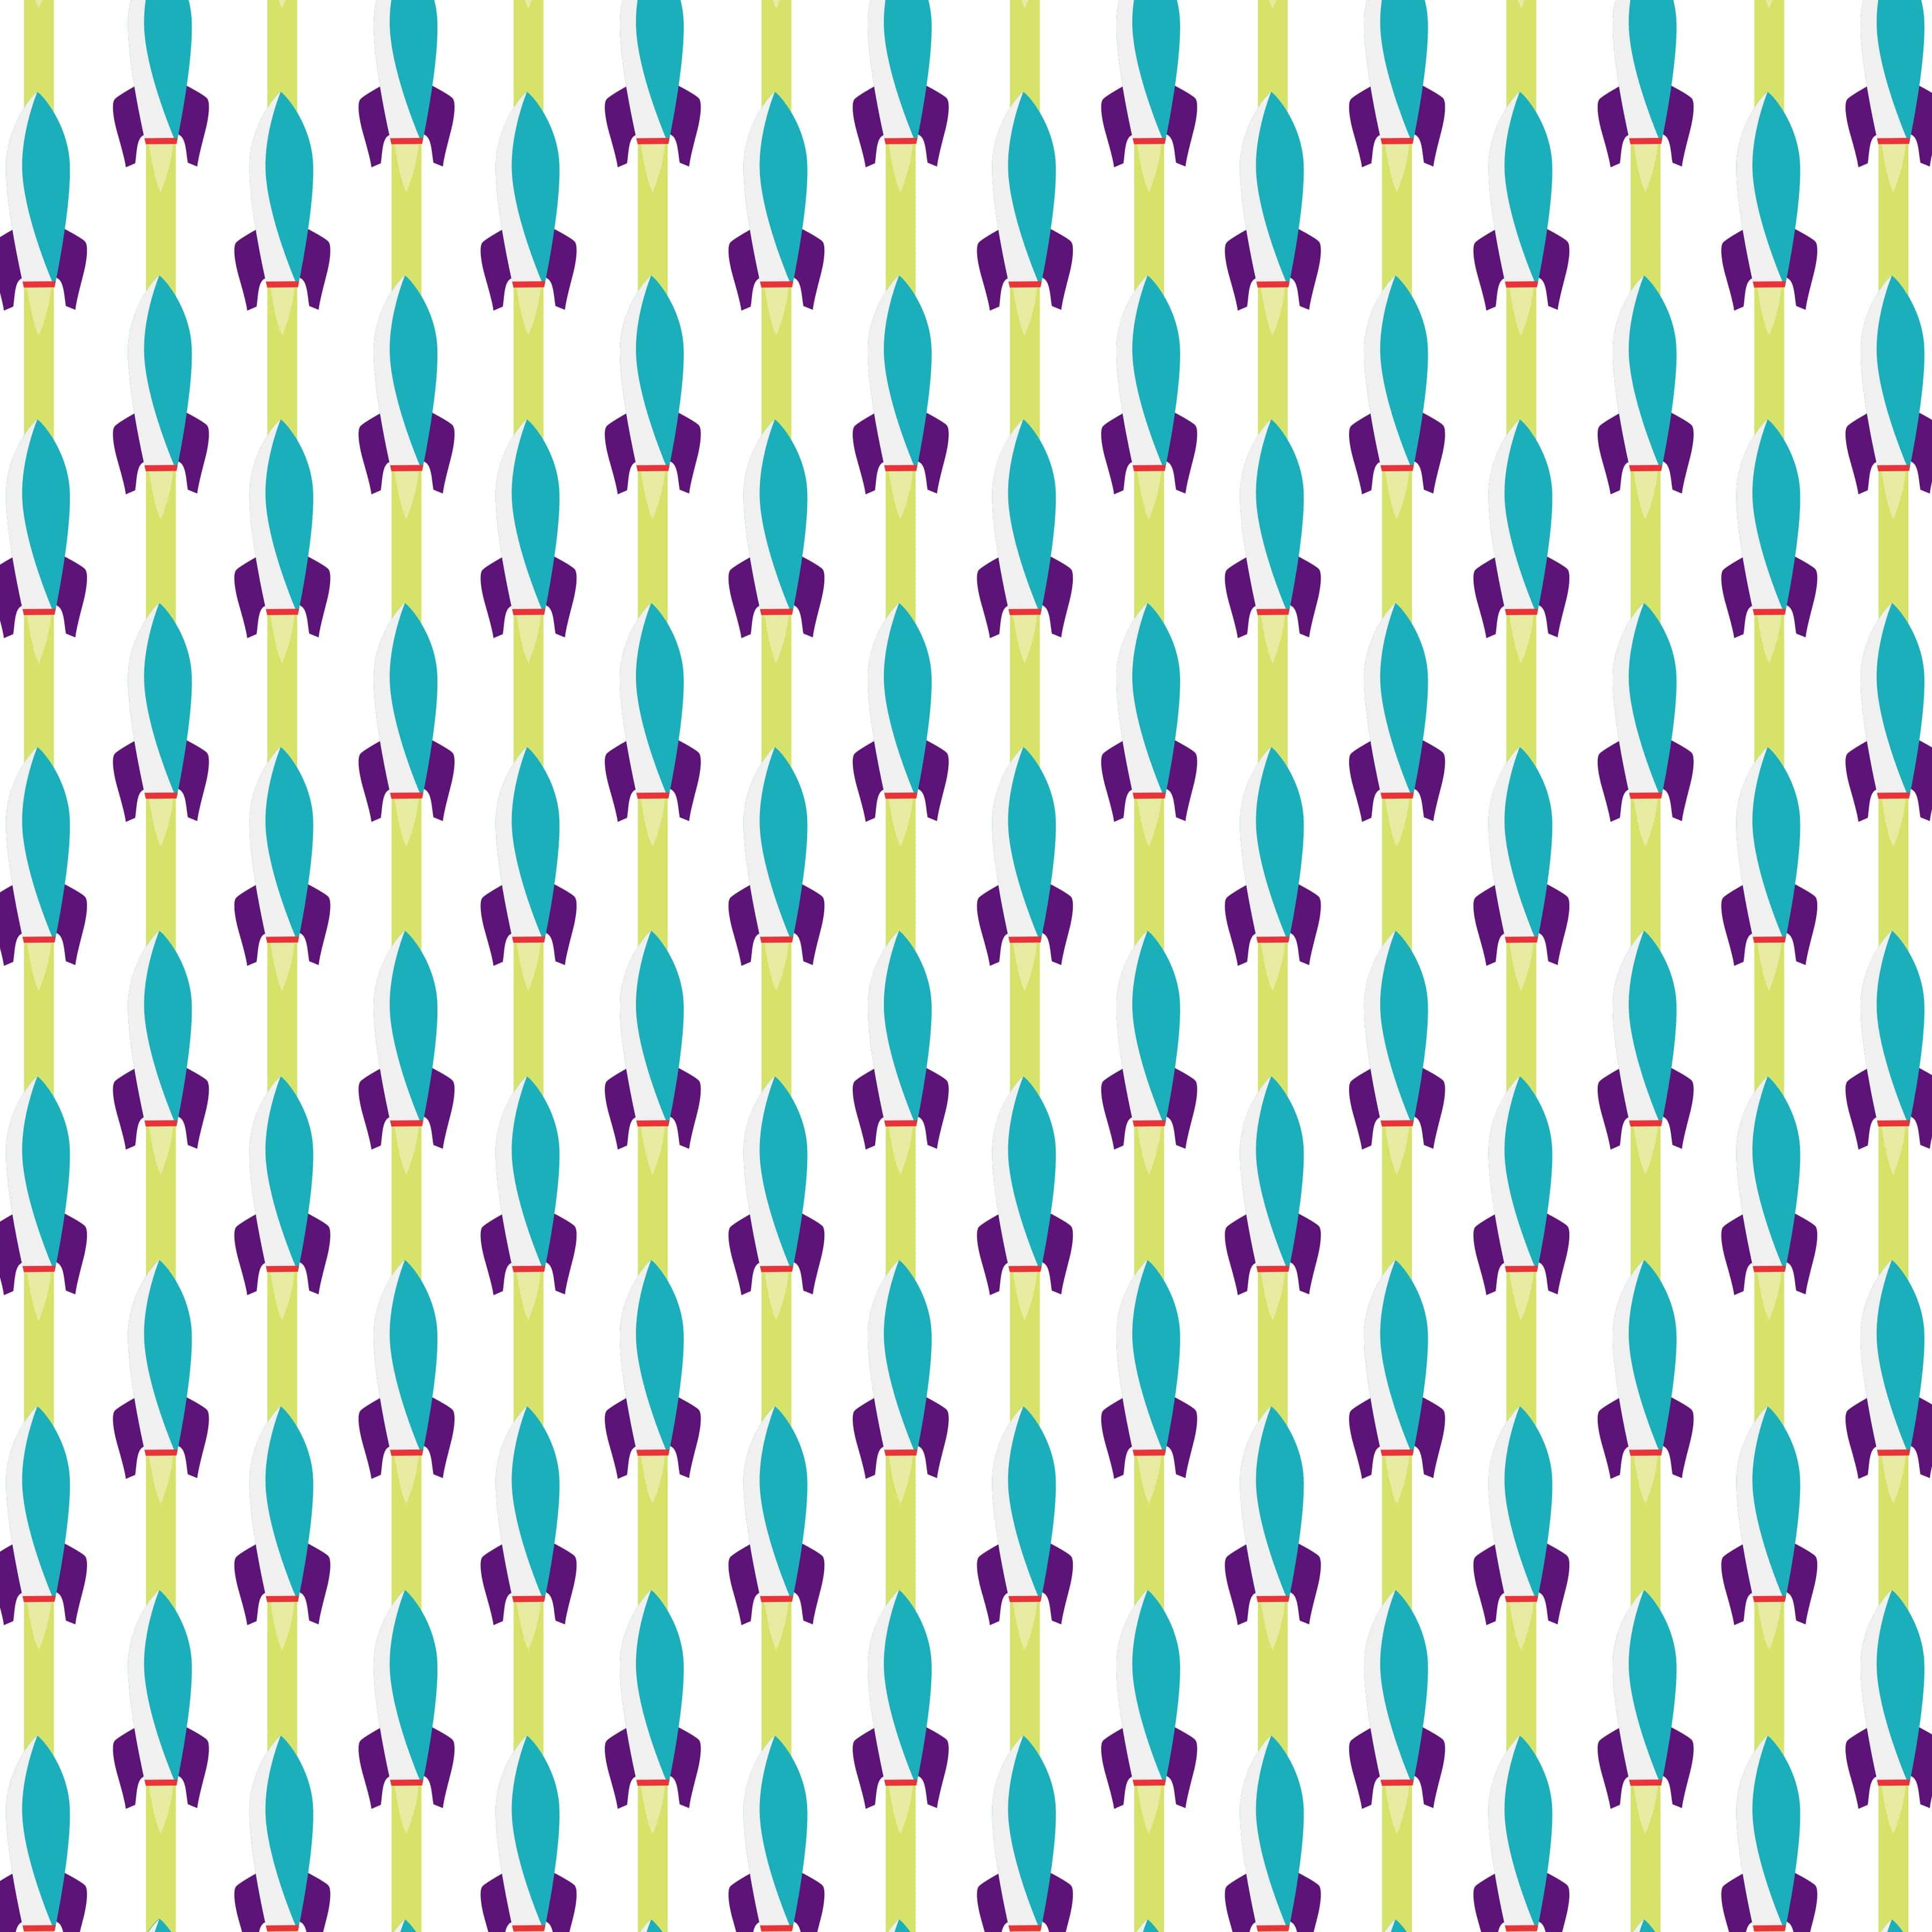 MNineDesign's Toy Box Collection Blast Off 12 x 12 Double-Sided Scrapbook Paper by SSC Designs - Scrapbook Supply Companies